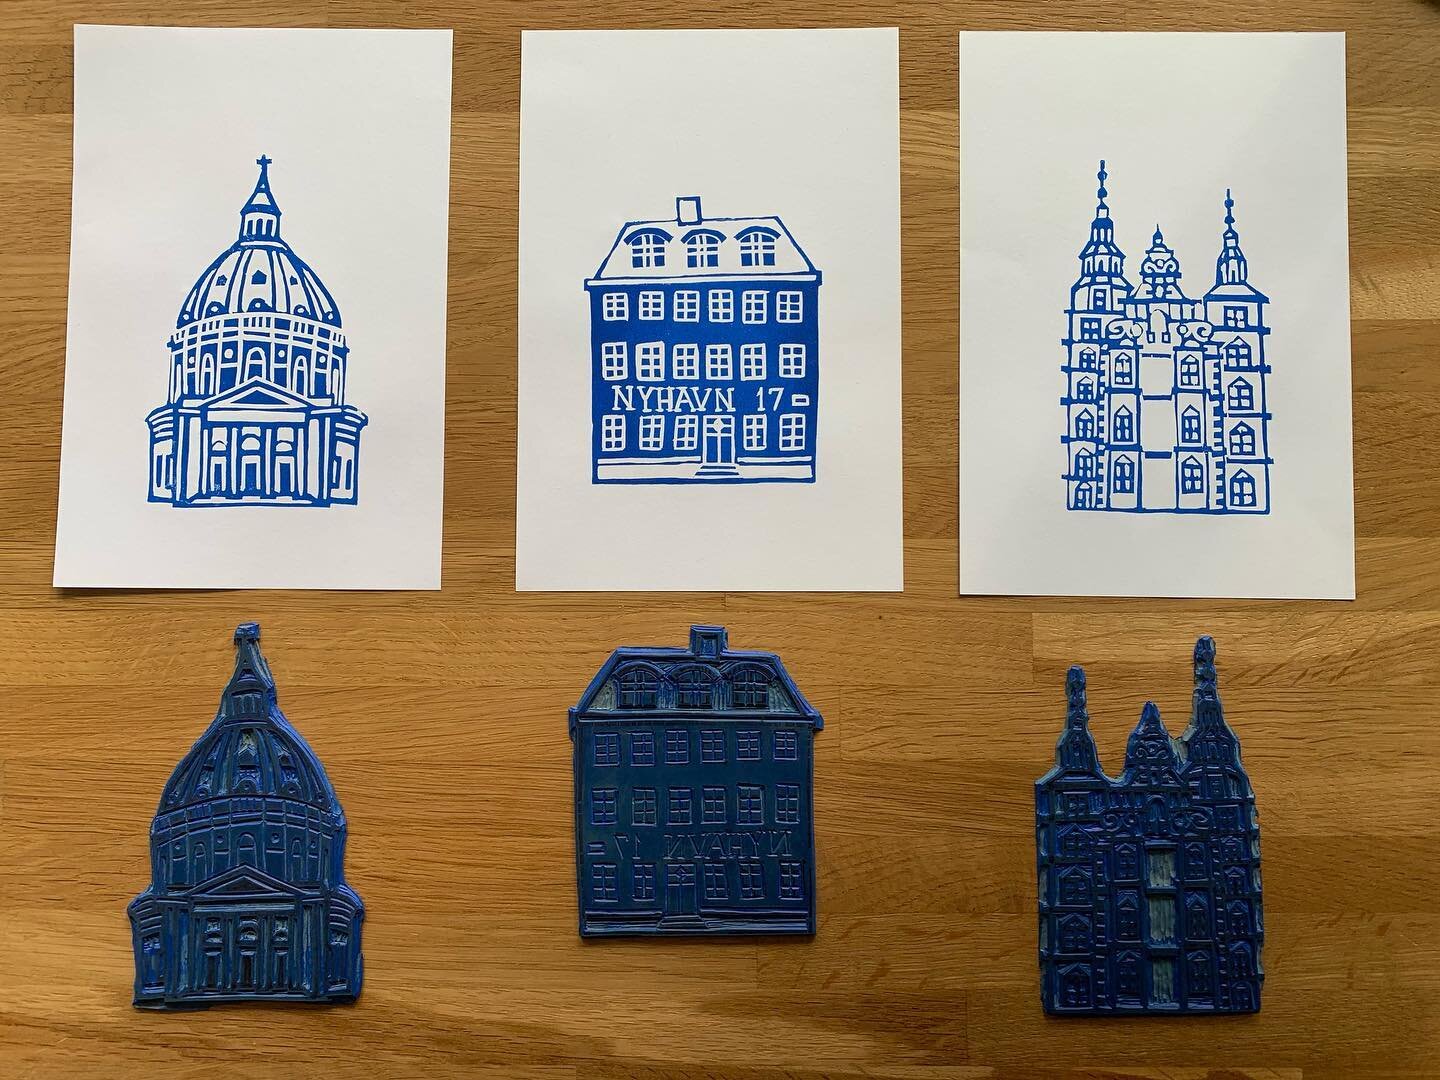 EXCITING NEWS!🚨My little handmade block prints are finally here! The prints depict Marmokirken, Nyhavn, and Rosenborg Castle. These will be limited edition prints as I will only make 40 of each. They will be numbered and sold for the very first time